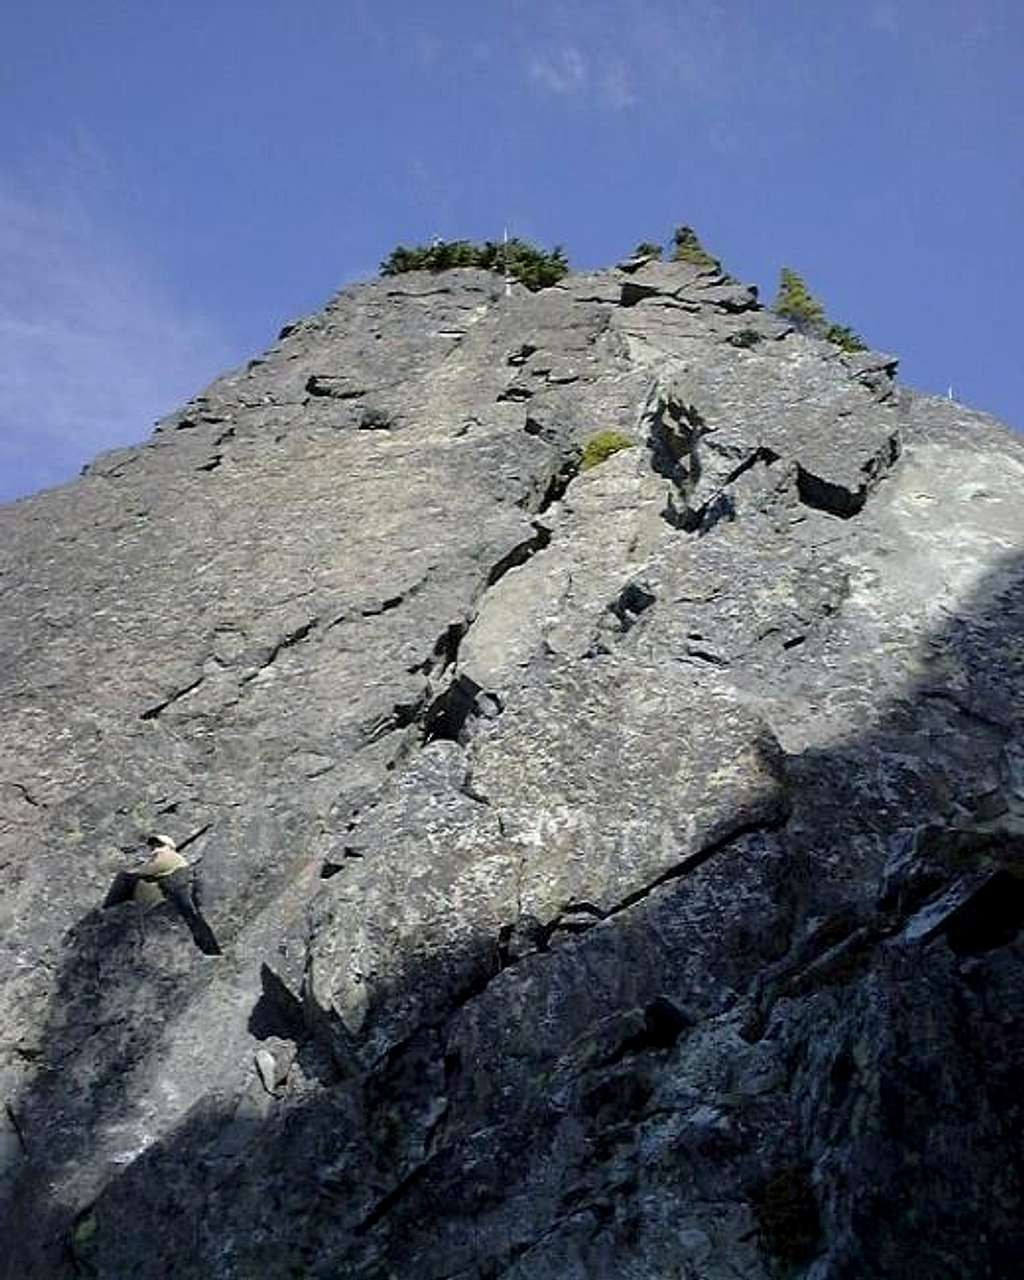 Looking up at the South Face...